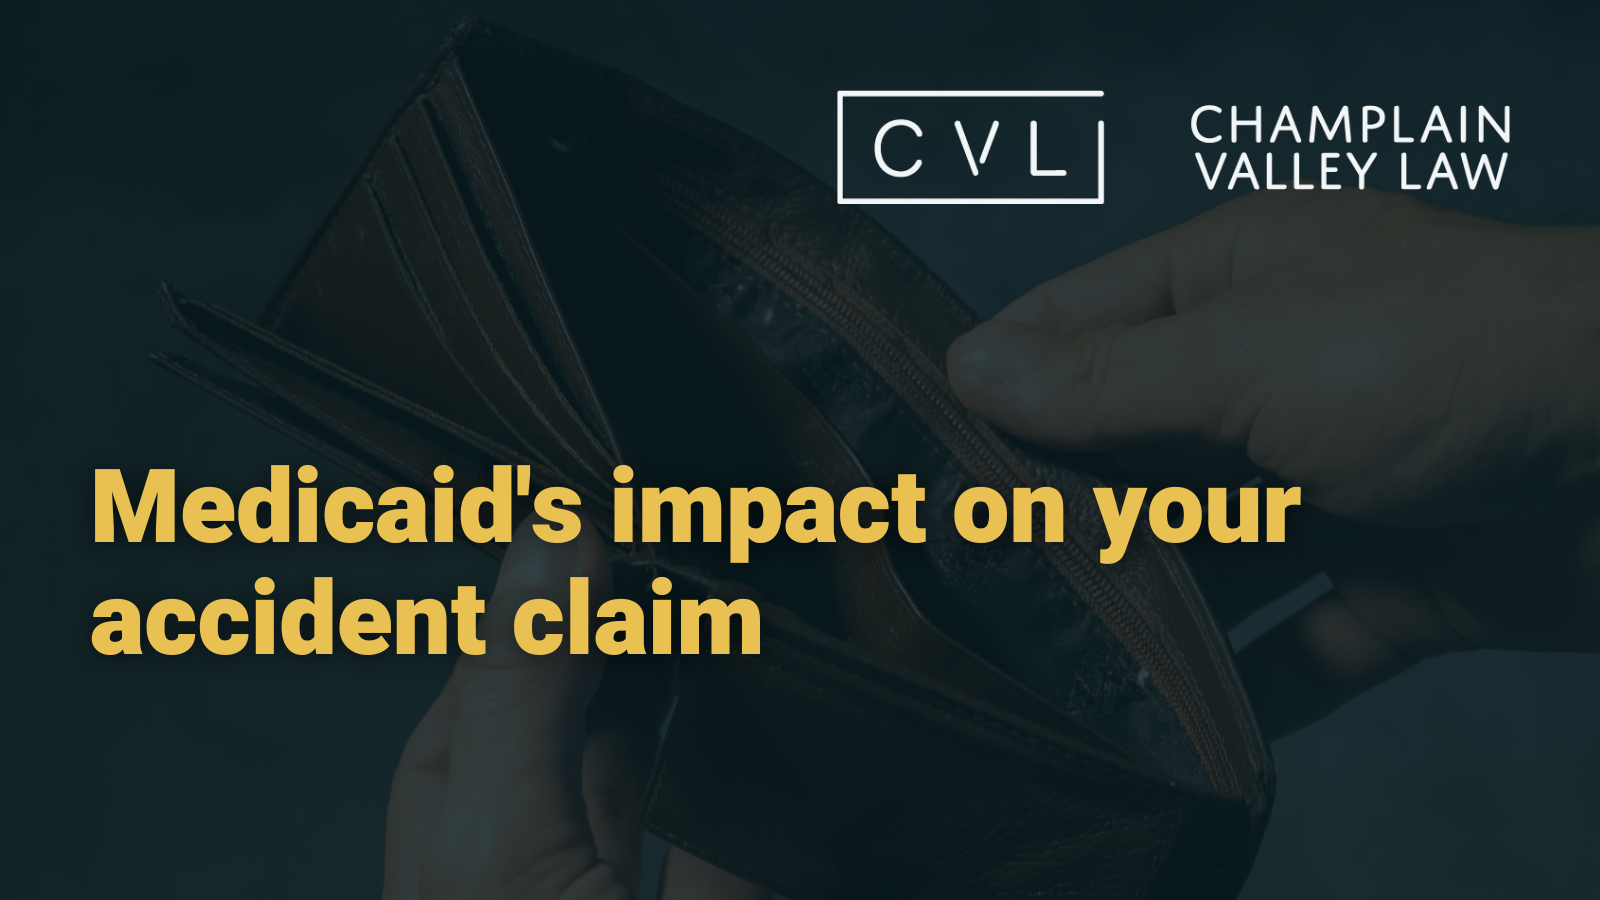 Medicaid's impact on your accident claim